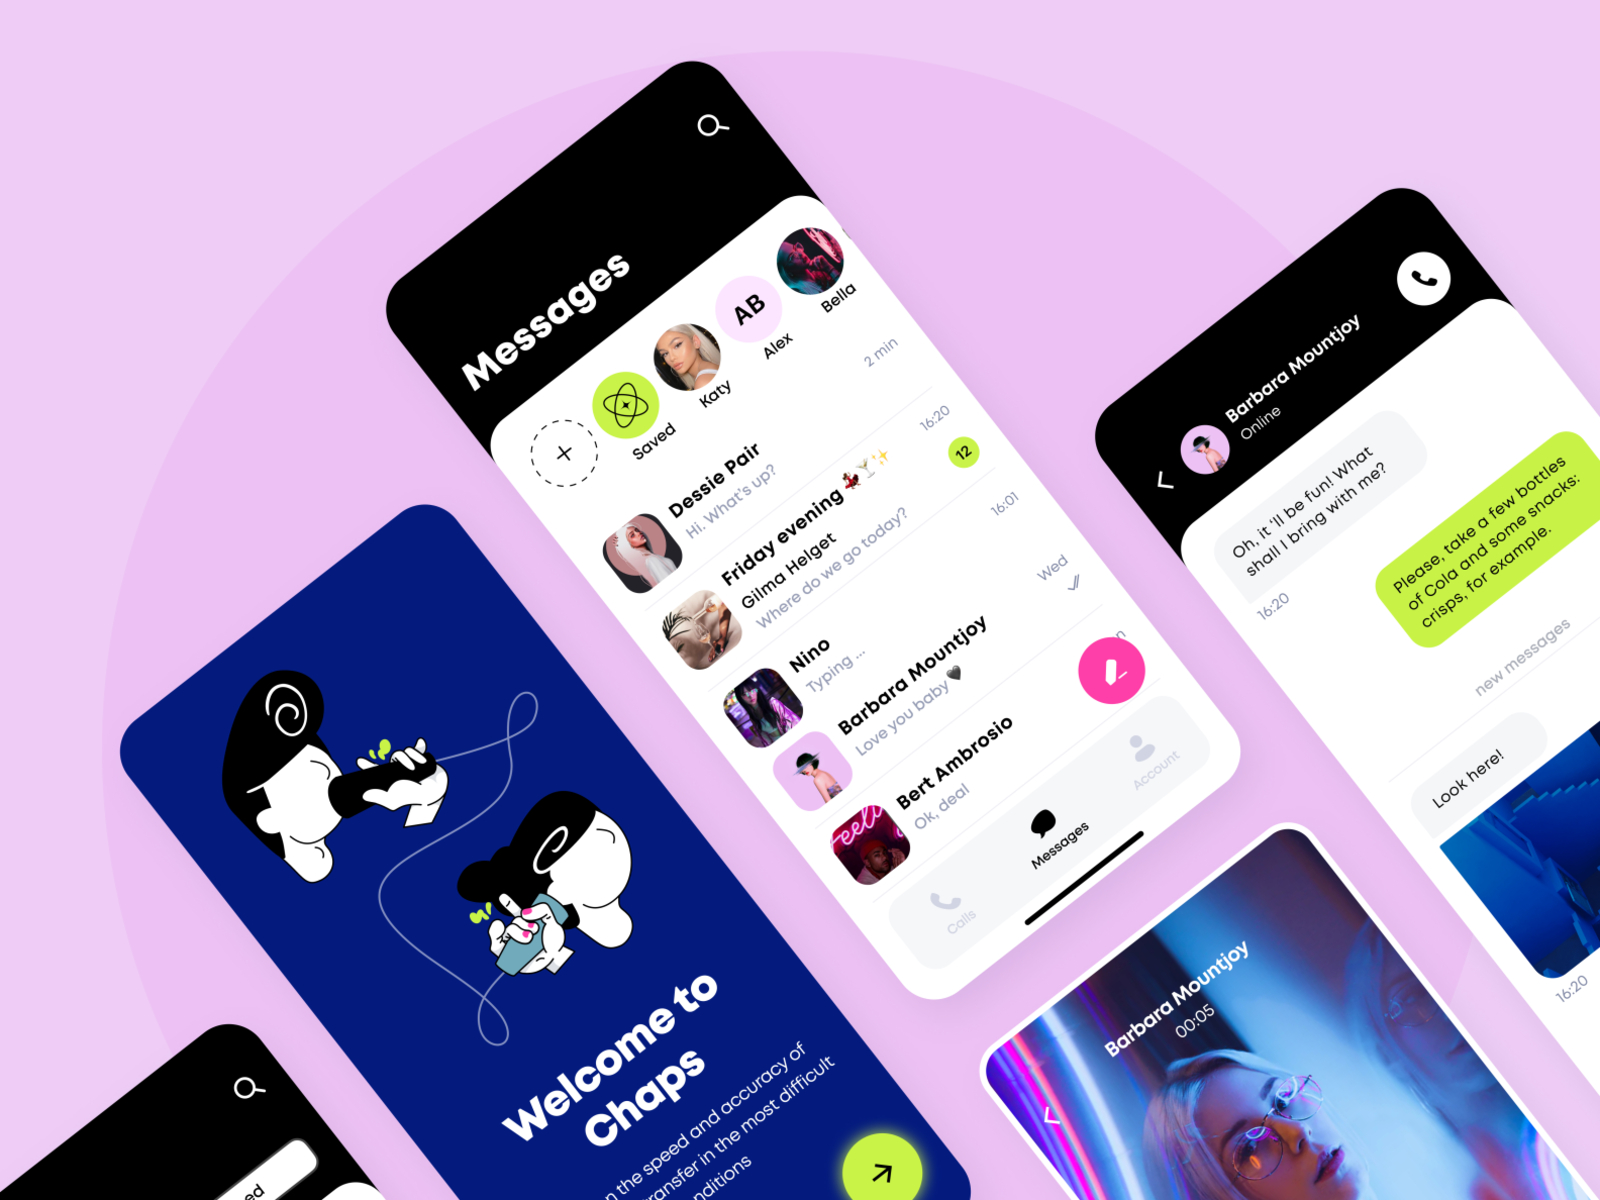 Chaps chat - Mobile app arounda attachment chat app chatting communication community concept design figma group chat illustration ios app messages messenger search social ui ux video call